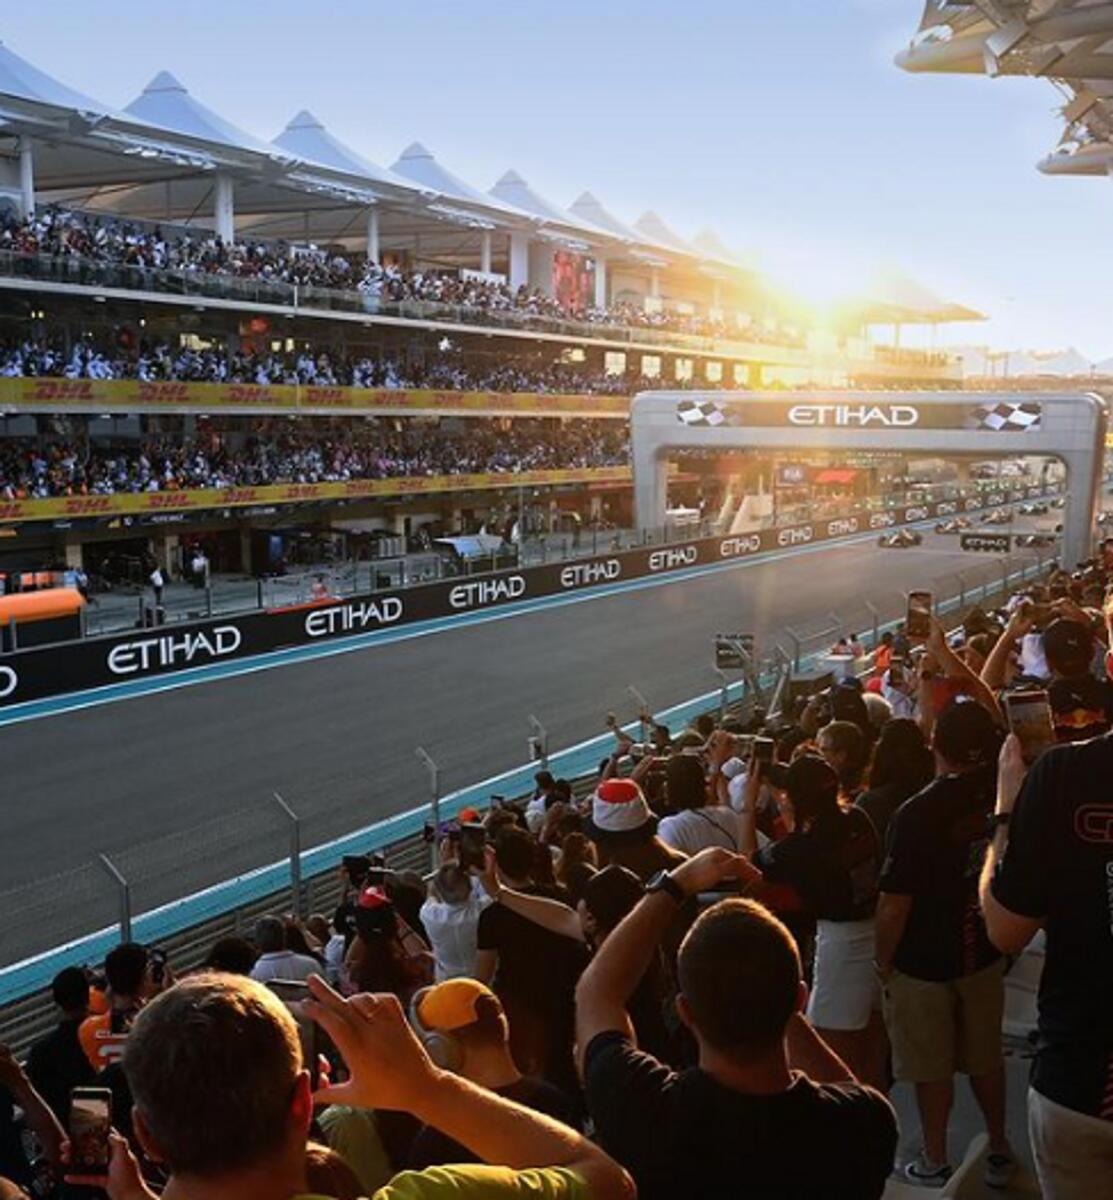 The Abu Dhabi Grand Prix continues to build a loyal and passionate fanbase,  - Instagram